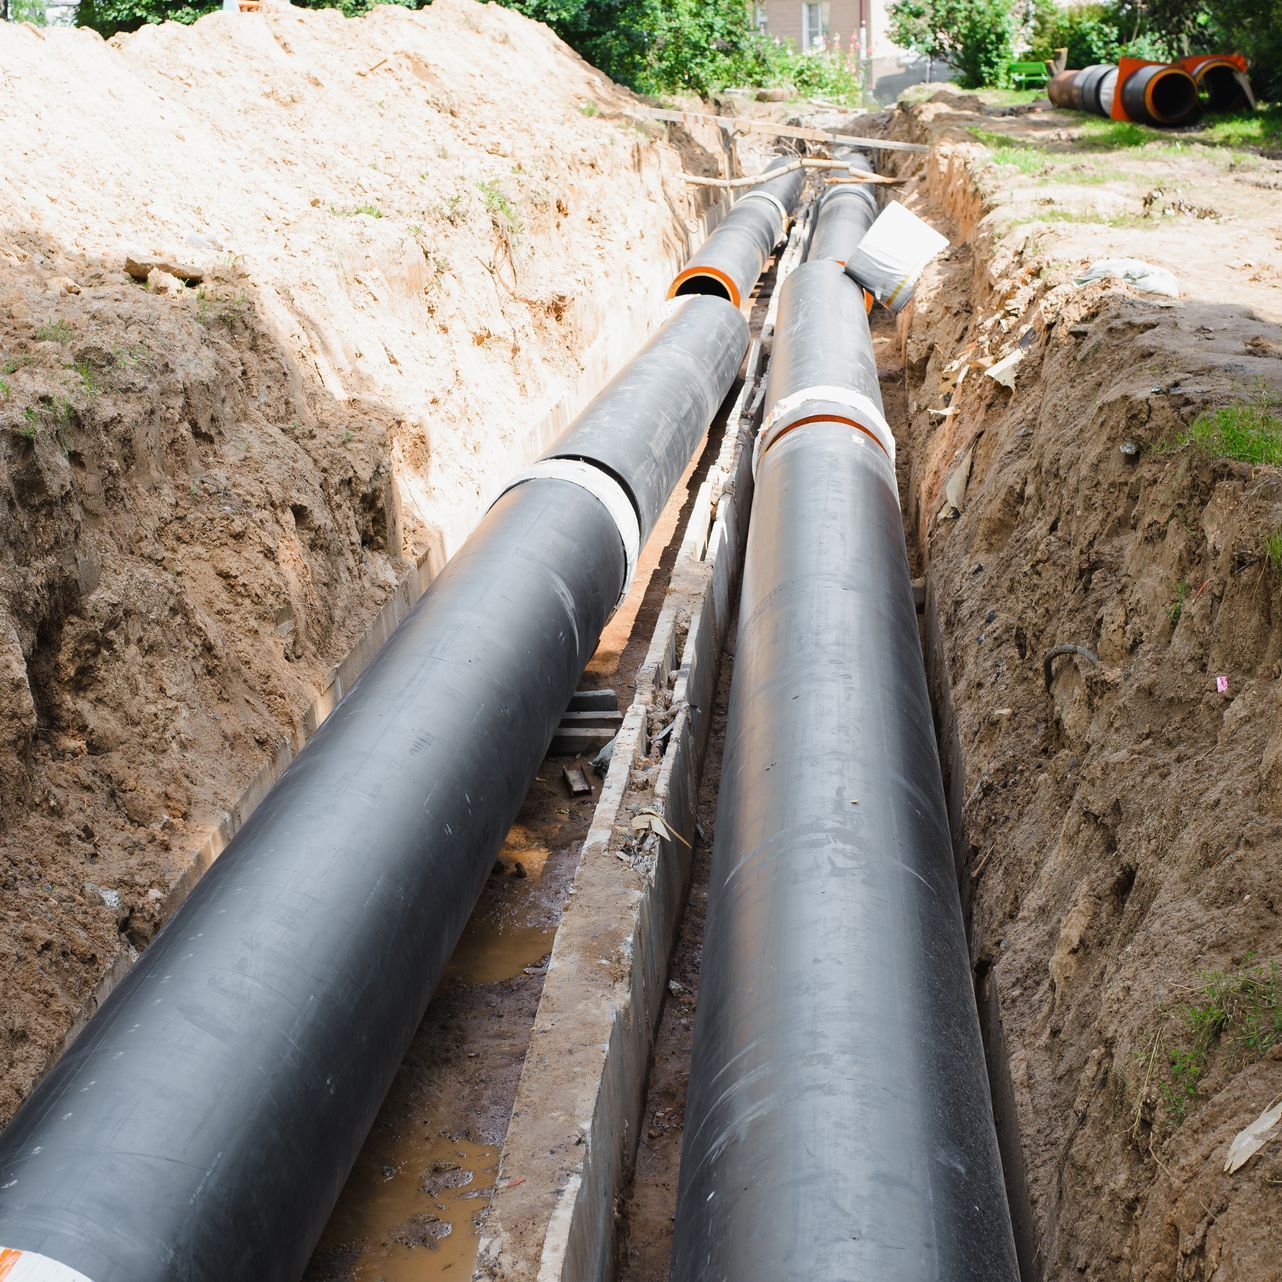 installation of new sewage pipes by professional plumbers